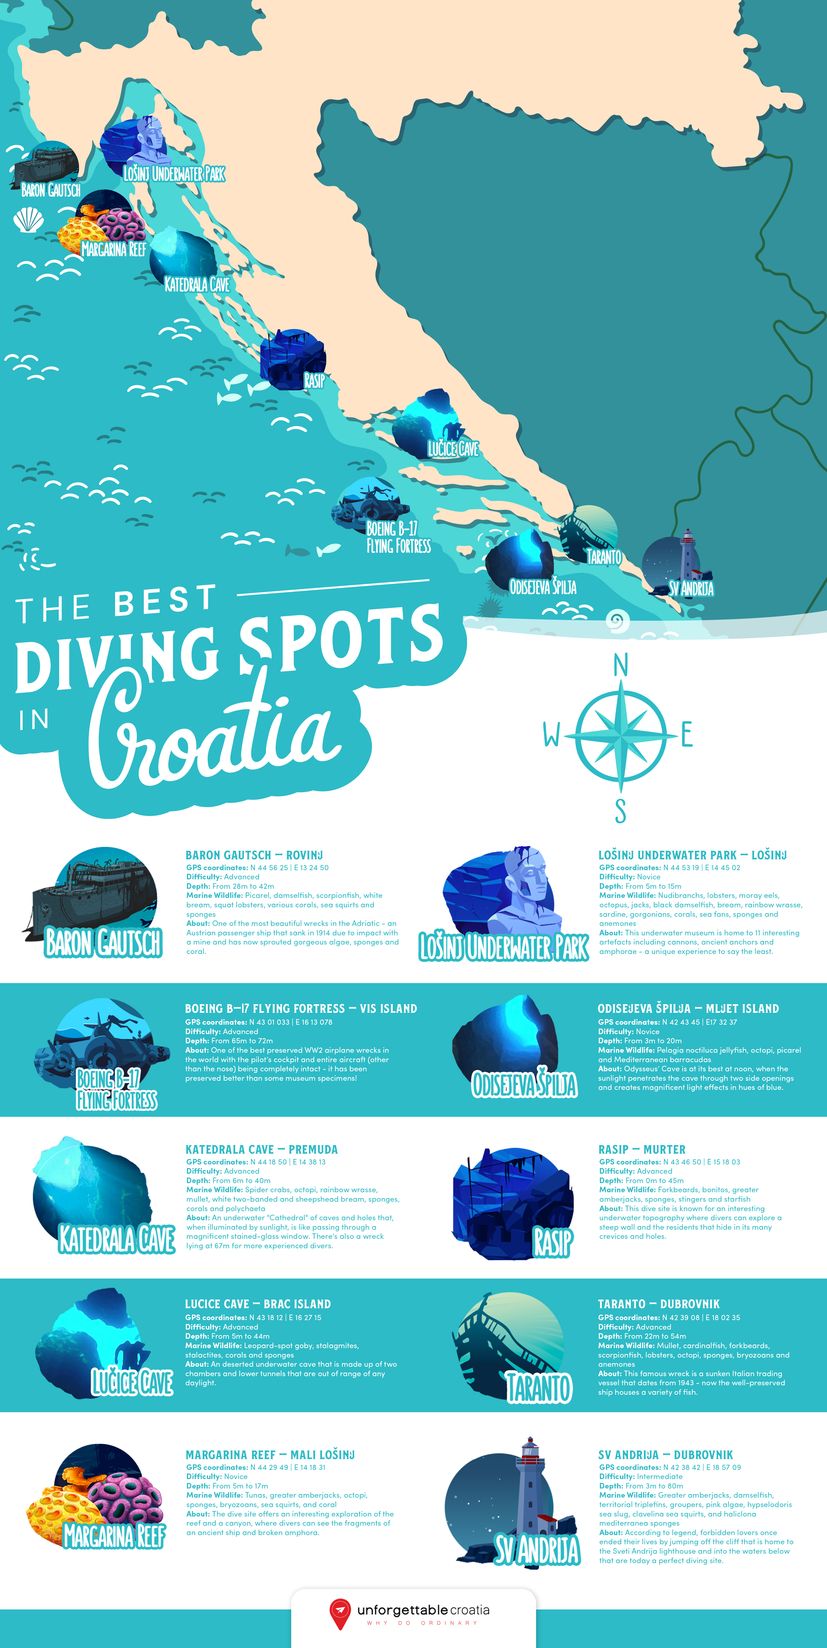 Croatia is one of the best European countries for snorkelling and scuba diving